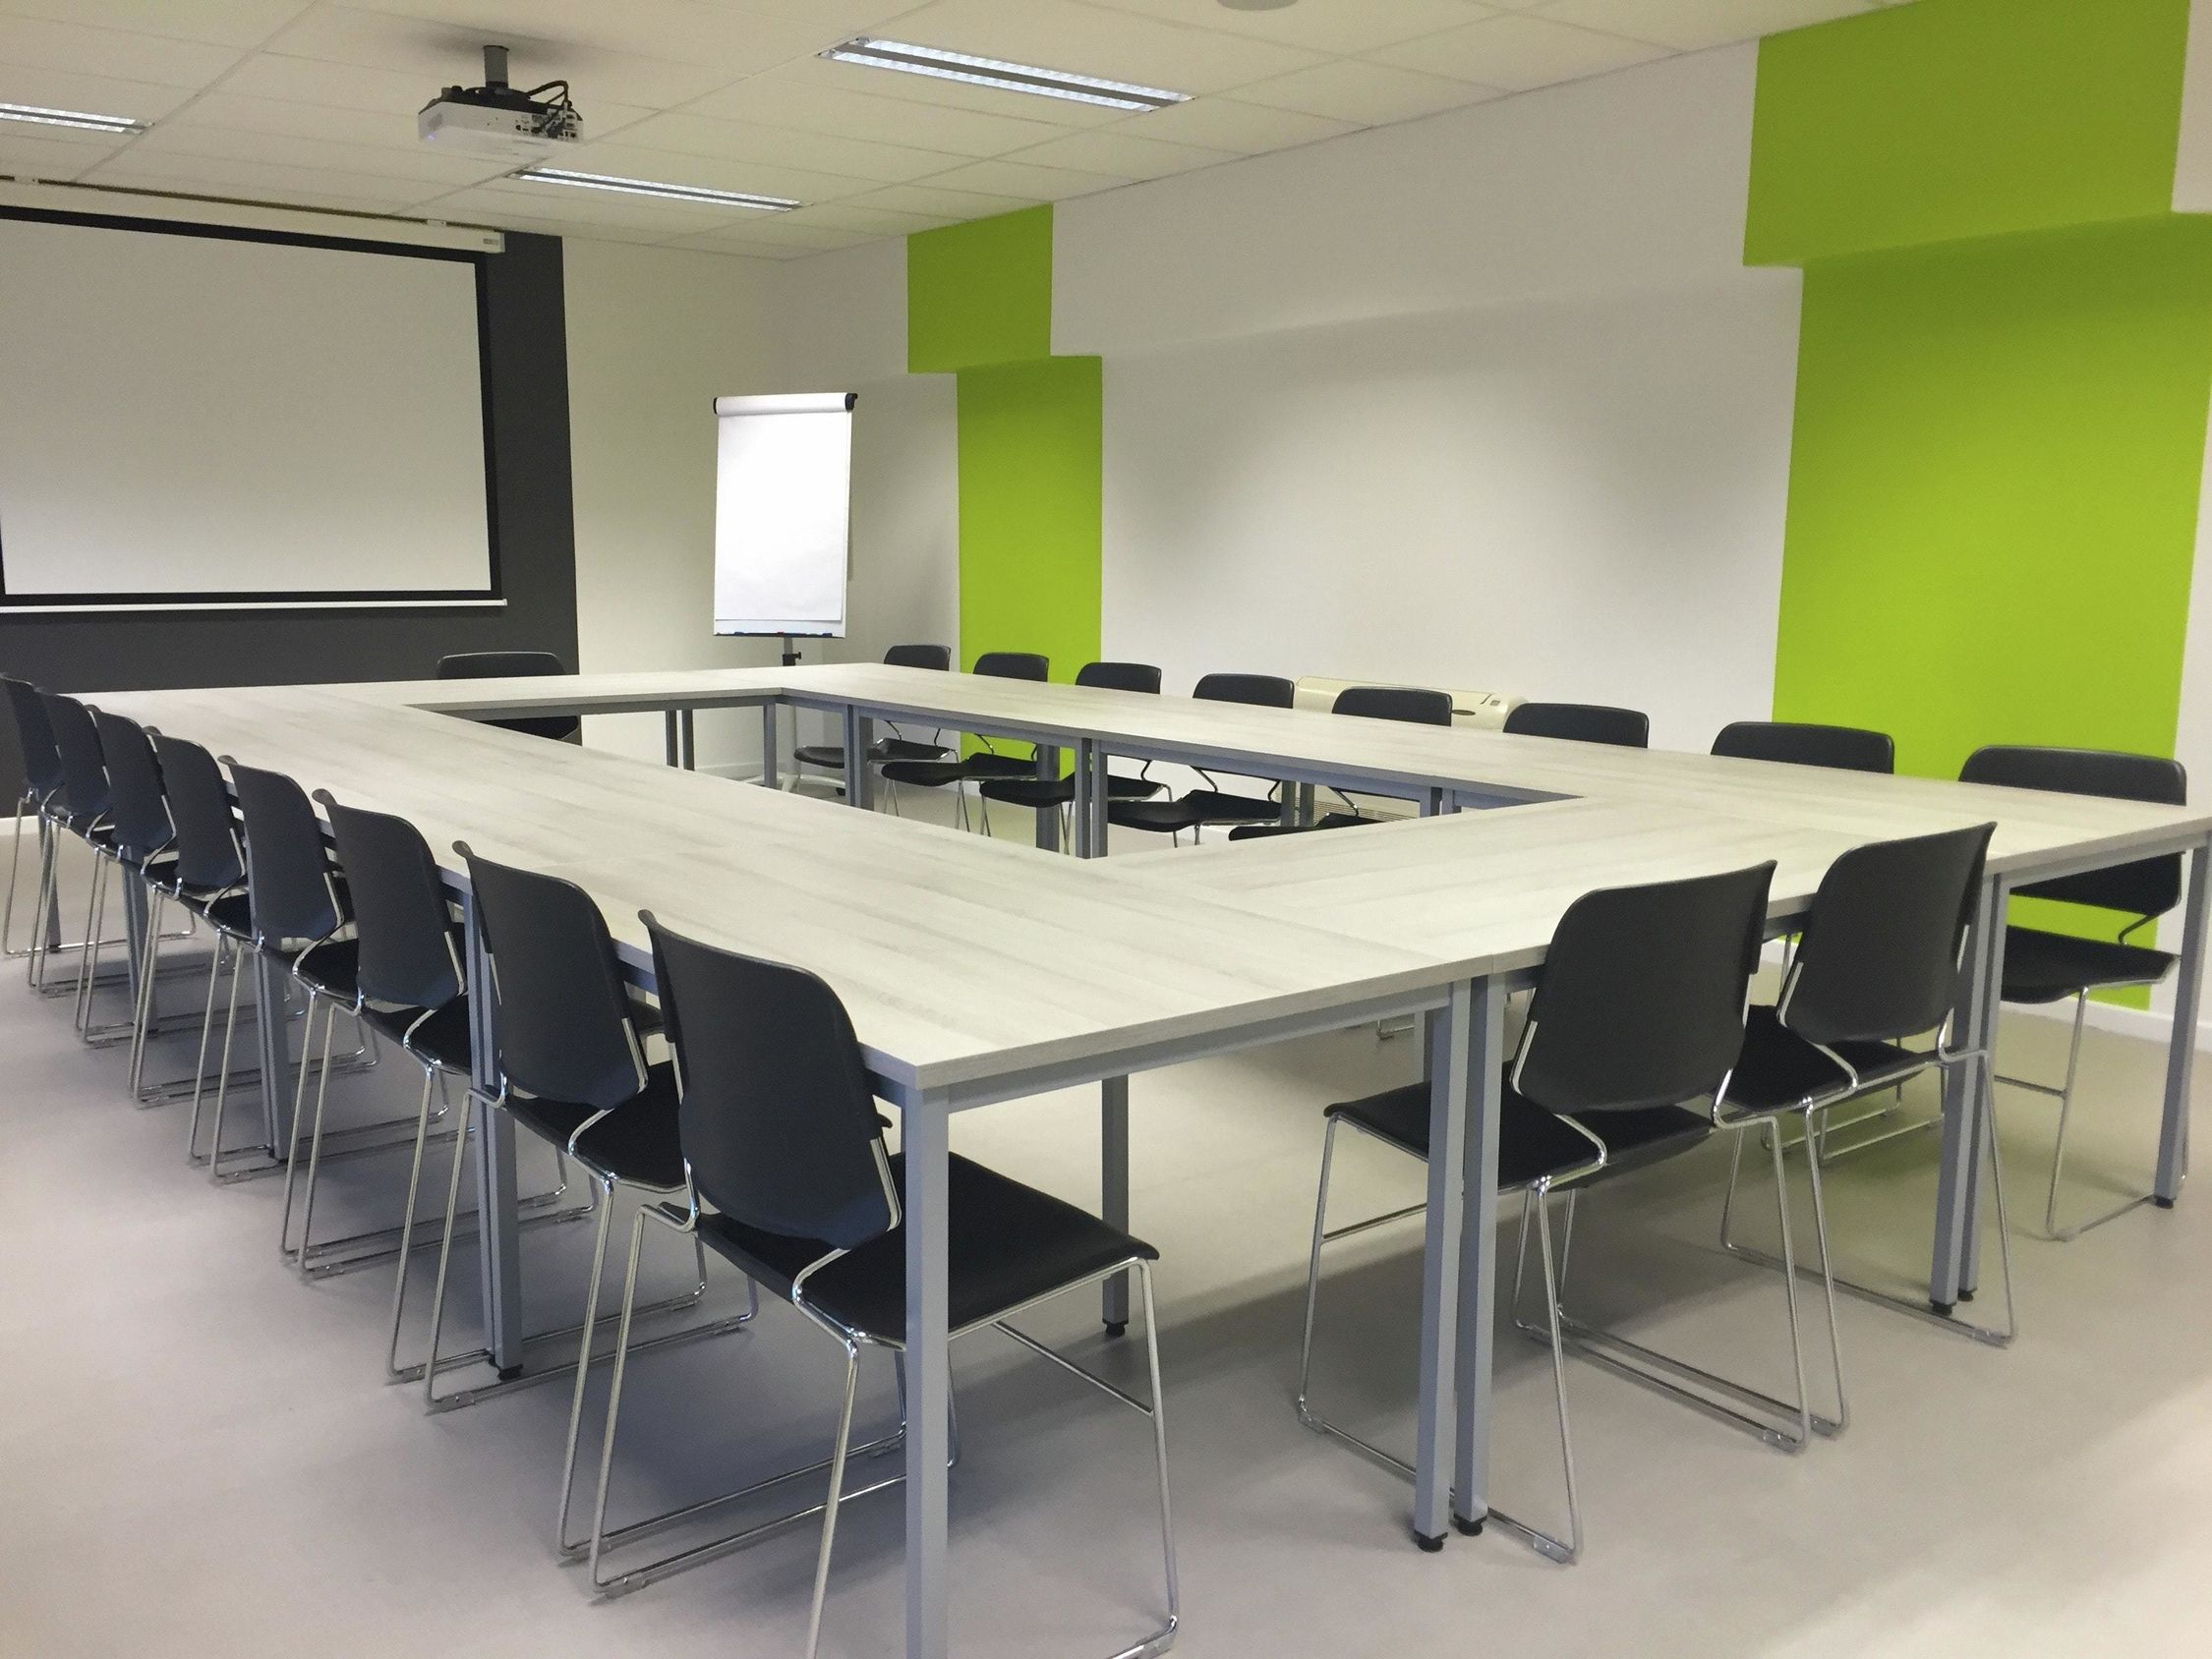 square training table with green striped walls